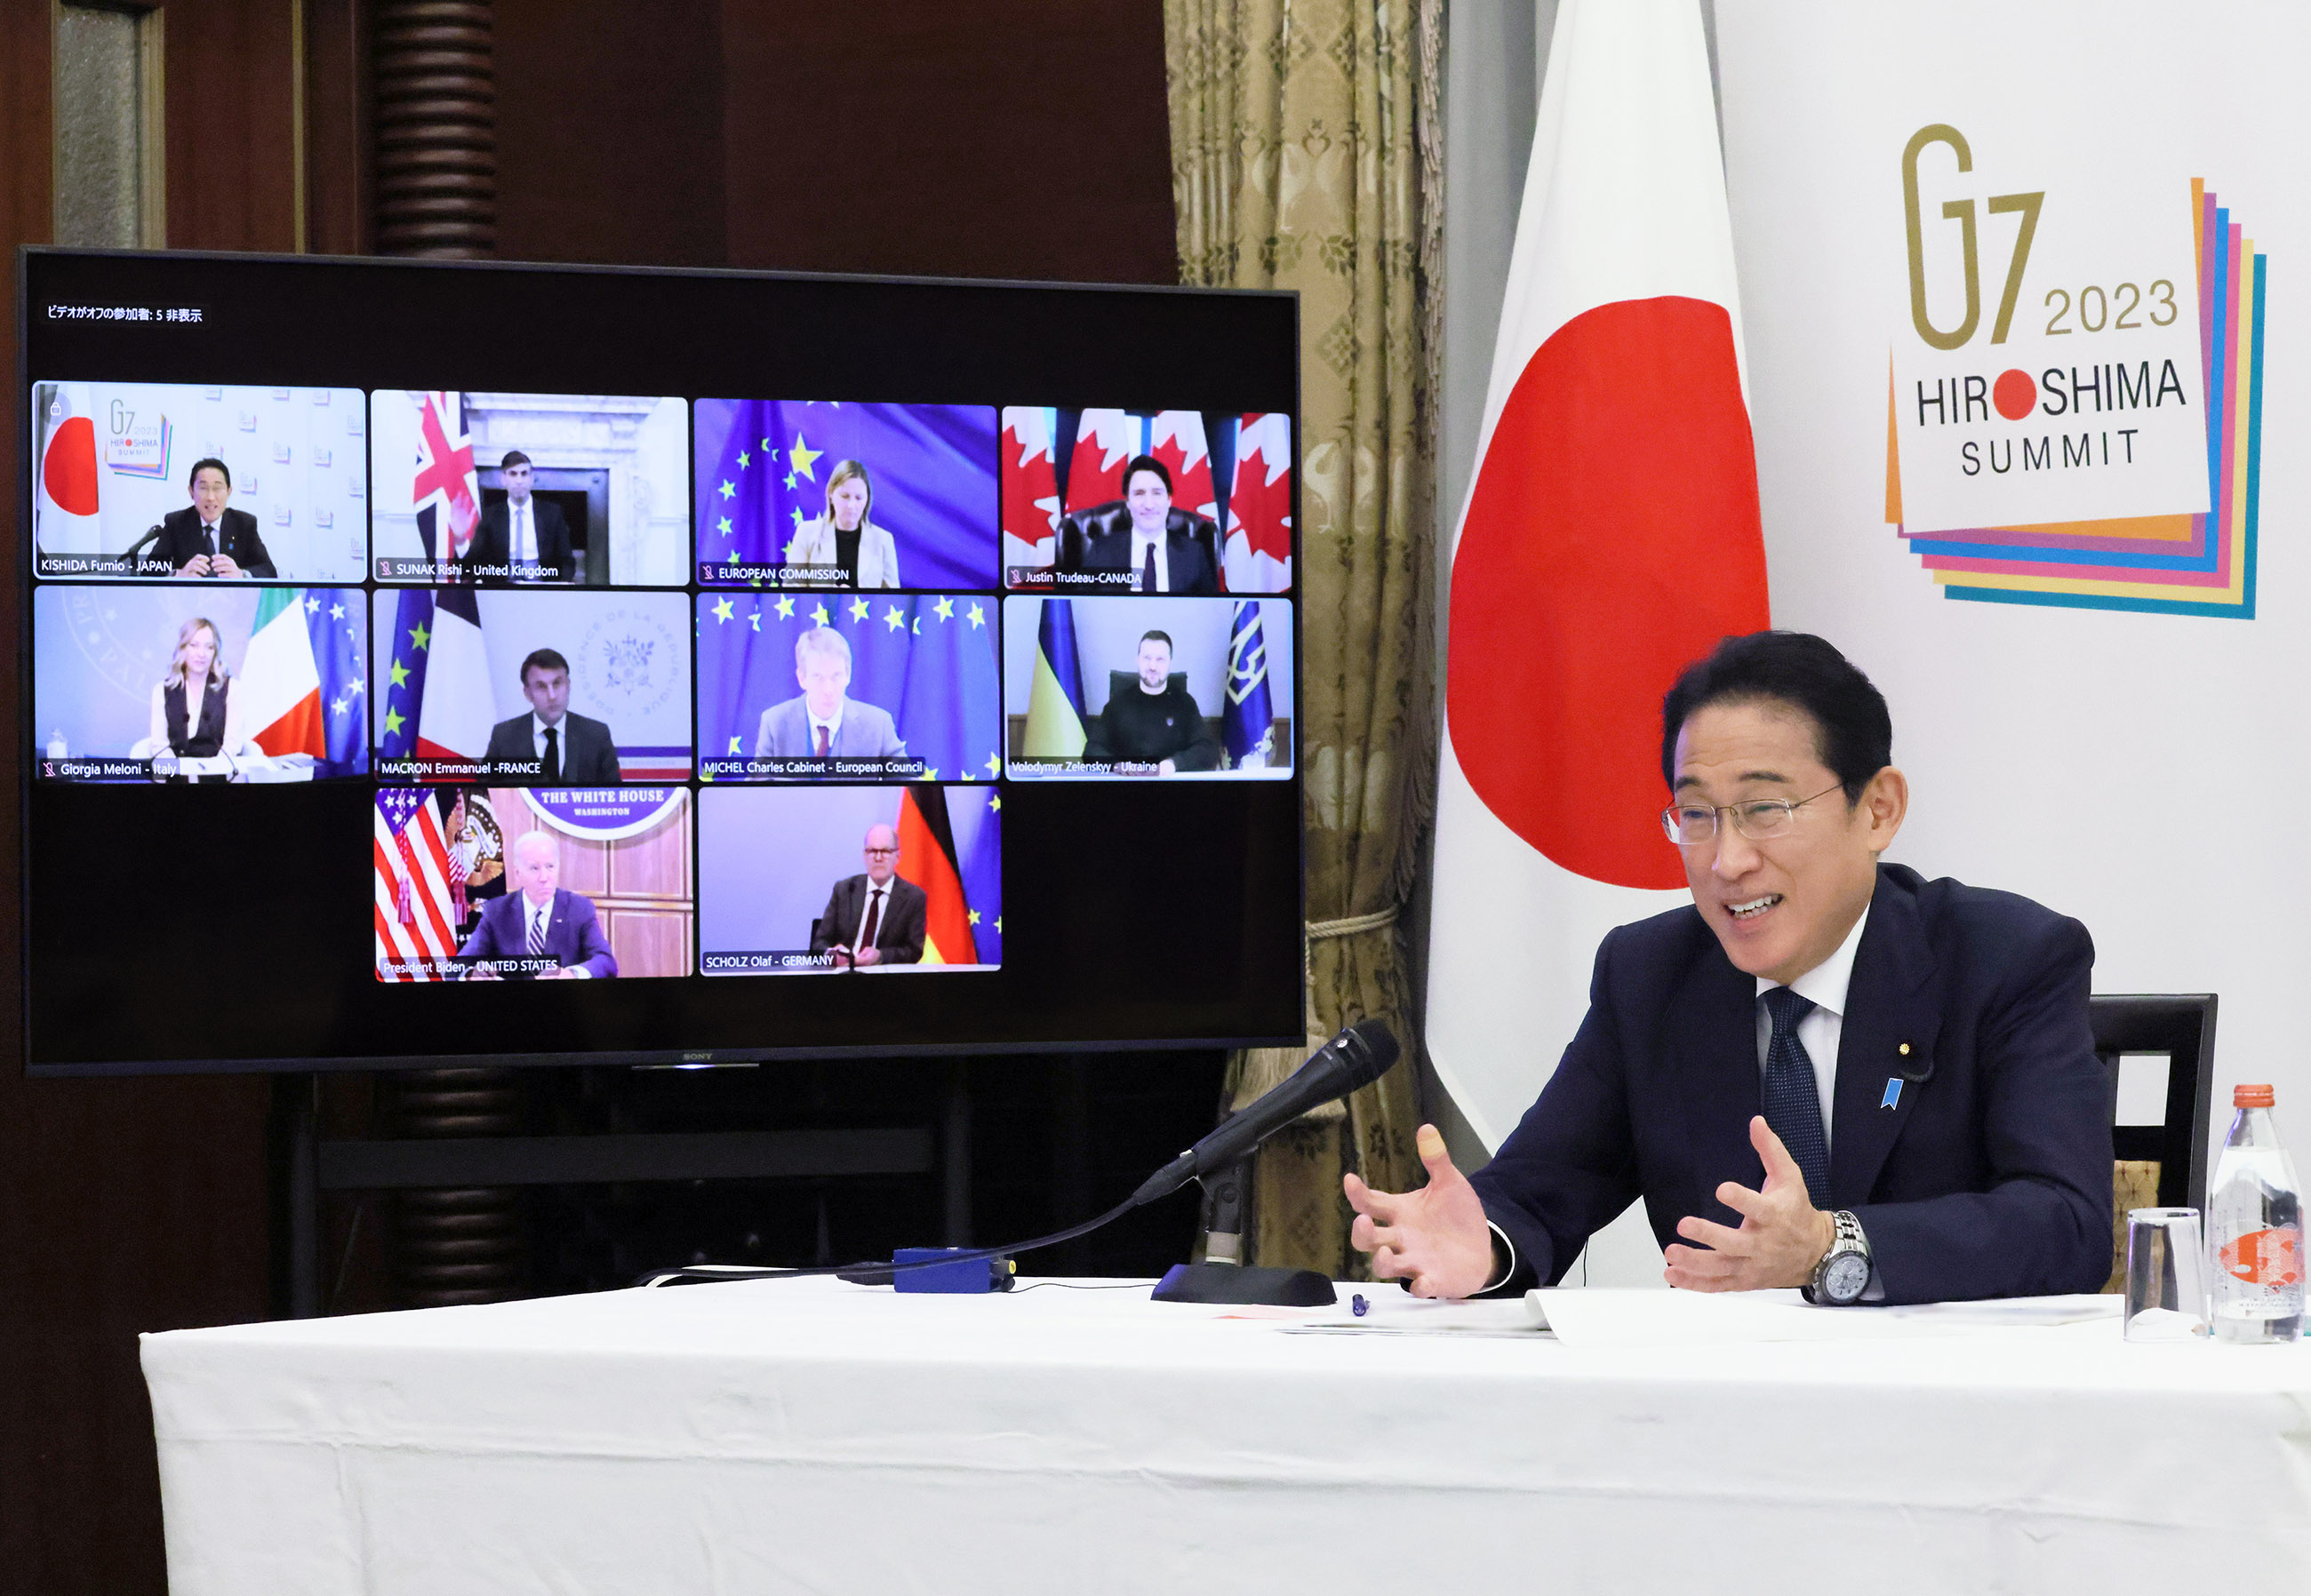 Prime Minister Kishida speaking at the G7 Leaders’ Video Conference  (2)